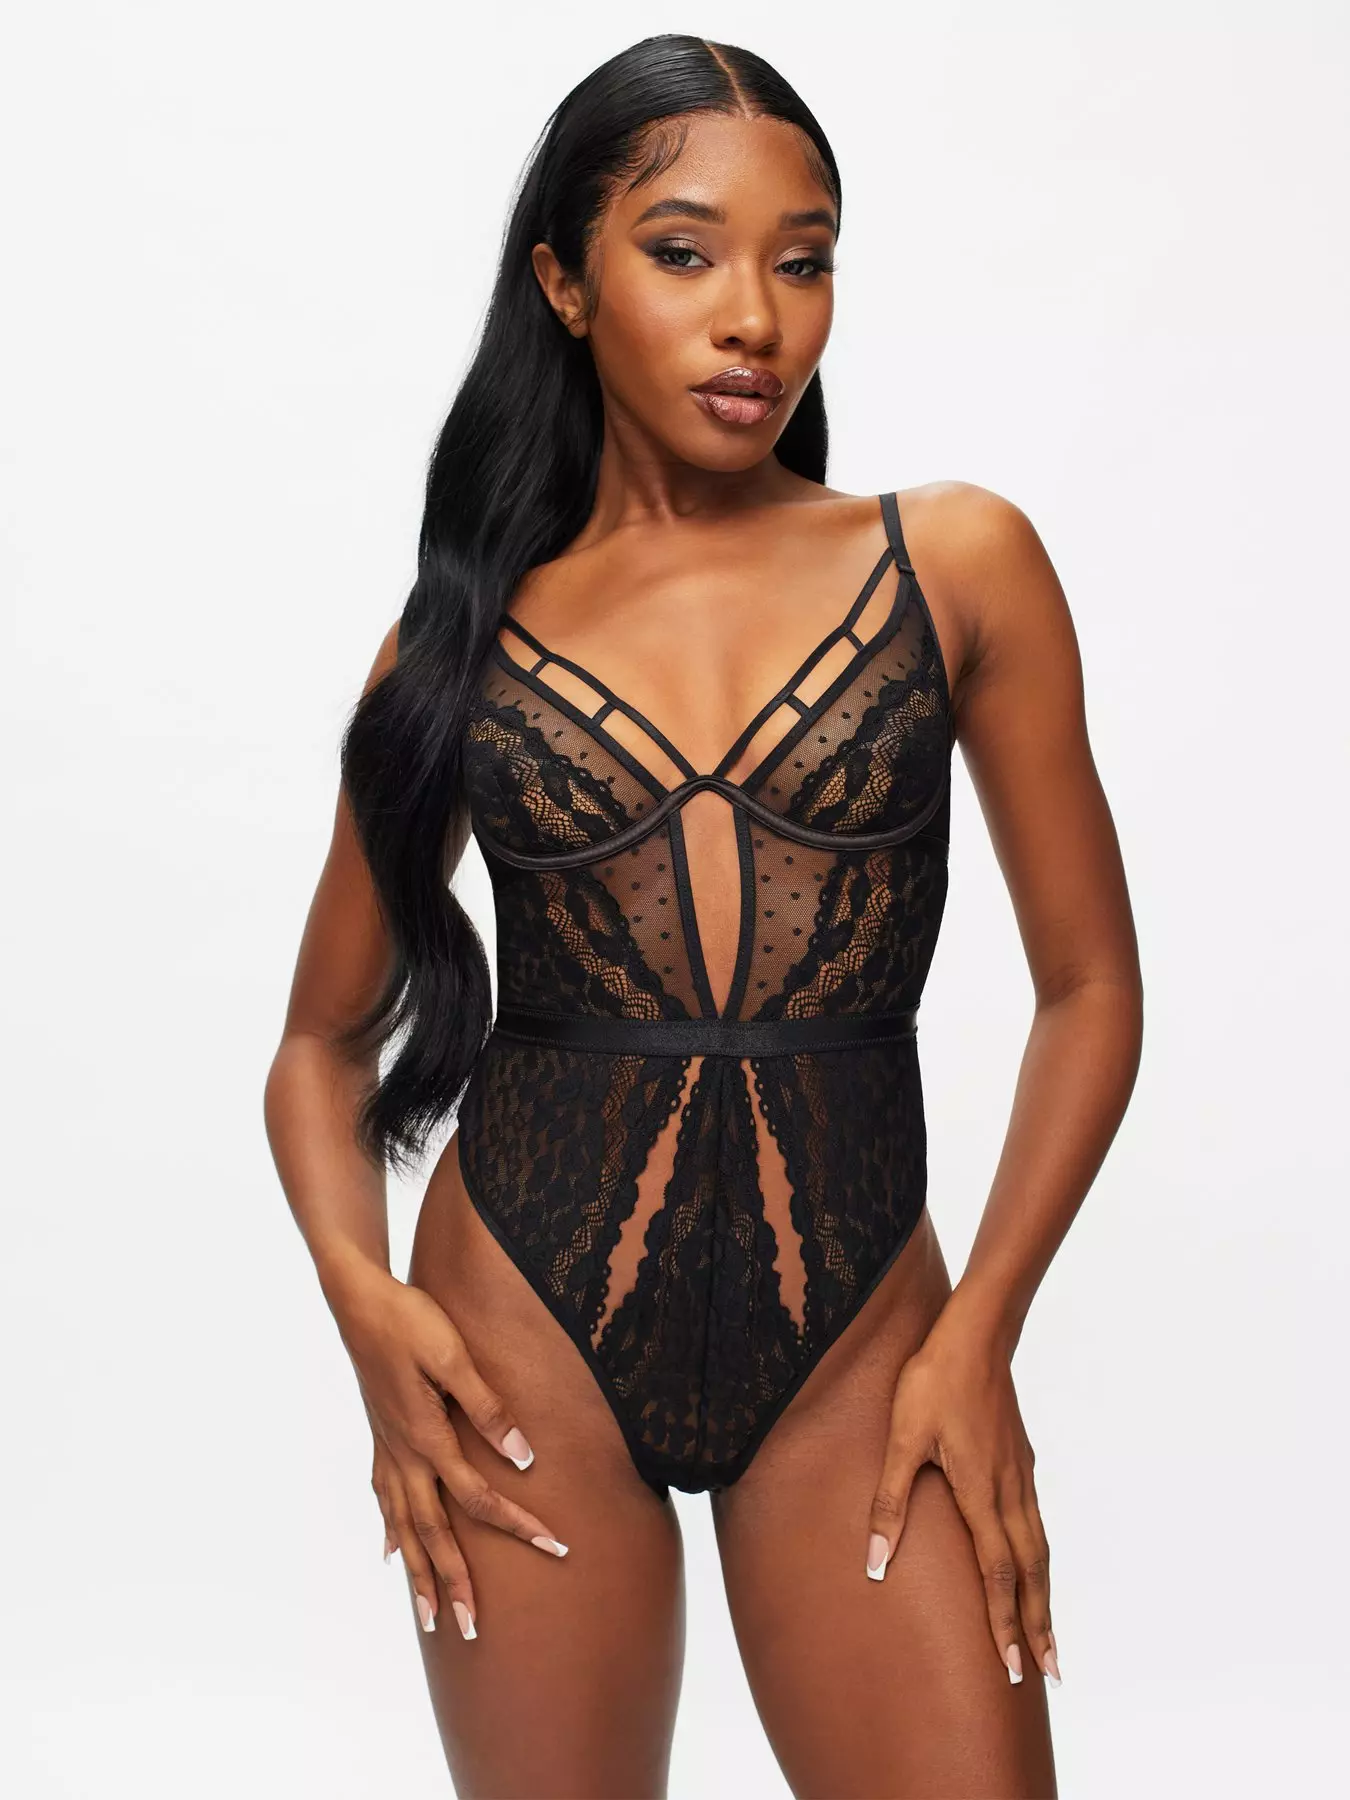 Plus Size Lingerie for Women - Sexy Strappy Harness Top Eyelash Lace  Bodysuit Naughty Bottom Mesh Teddy Outfit